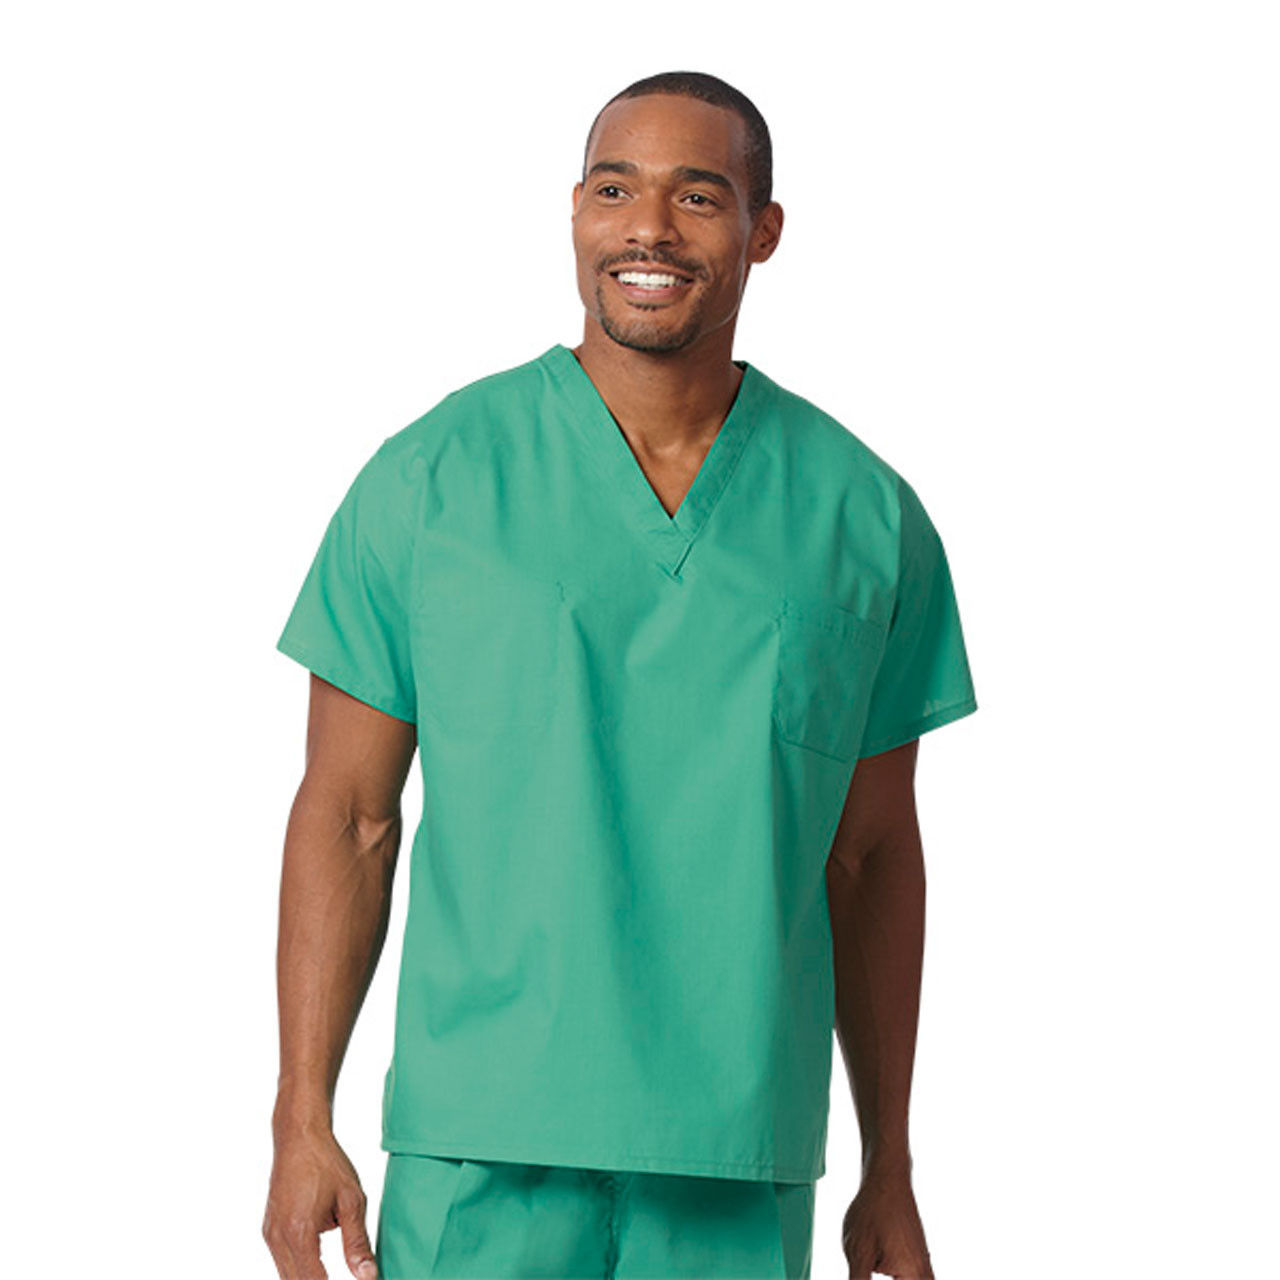 Can these reversible scrubs withstand frequent washing?